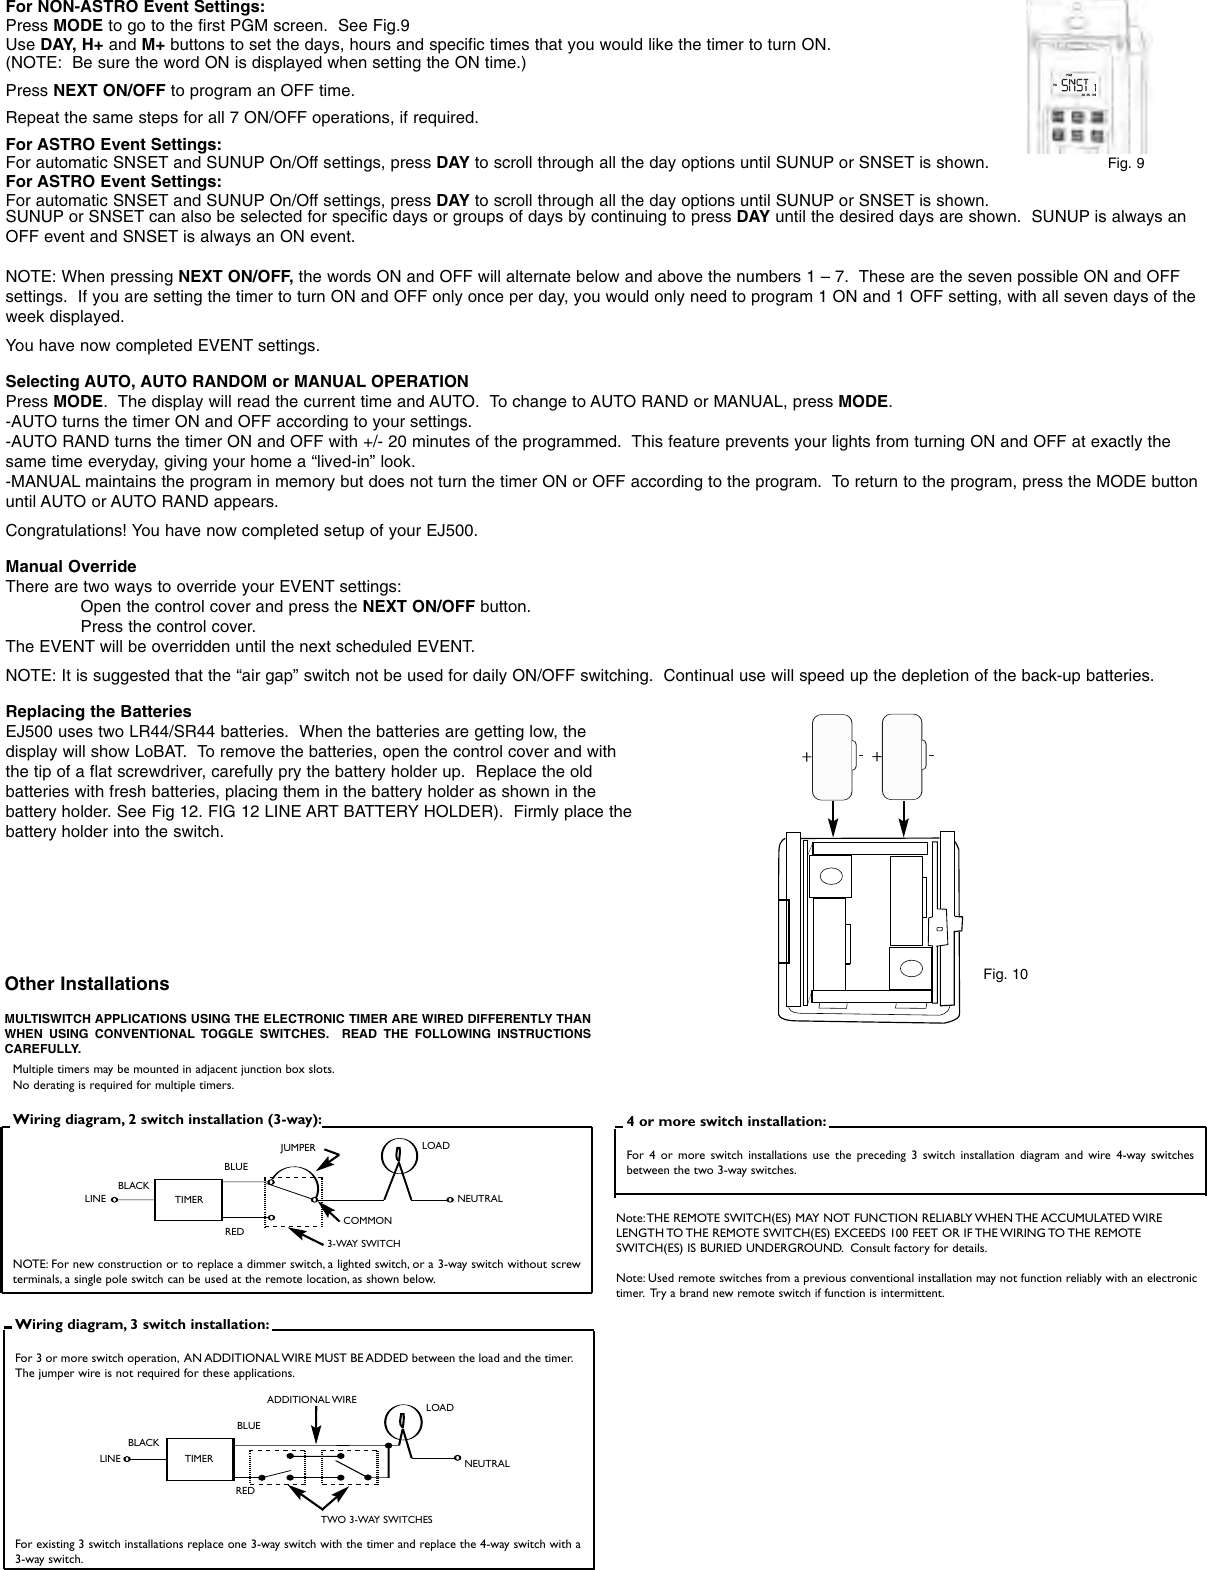 Page 3 of 4 - Intermatic In Wall Timer Ej500c